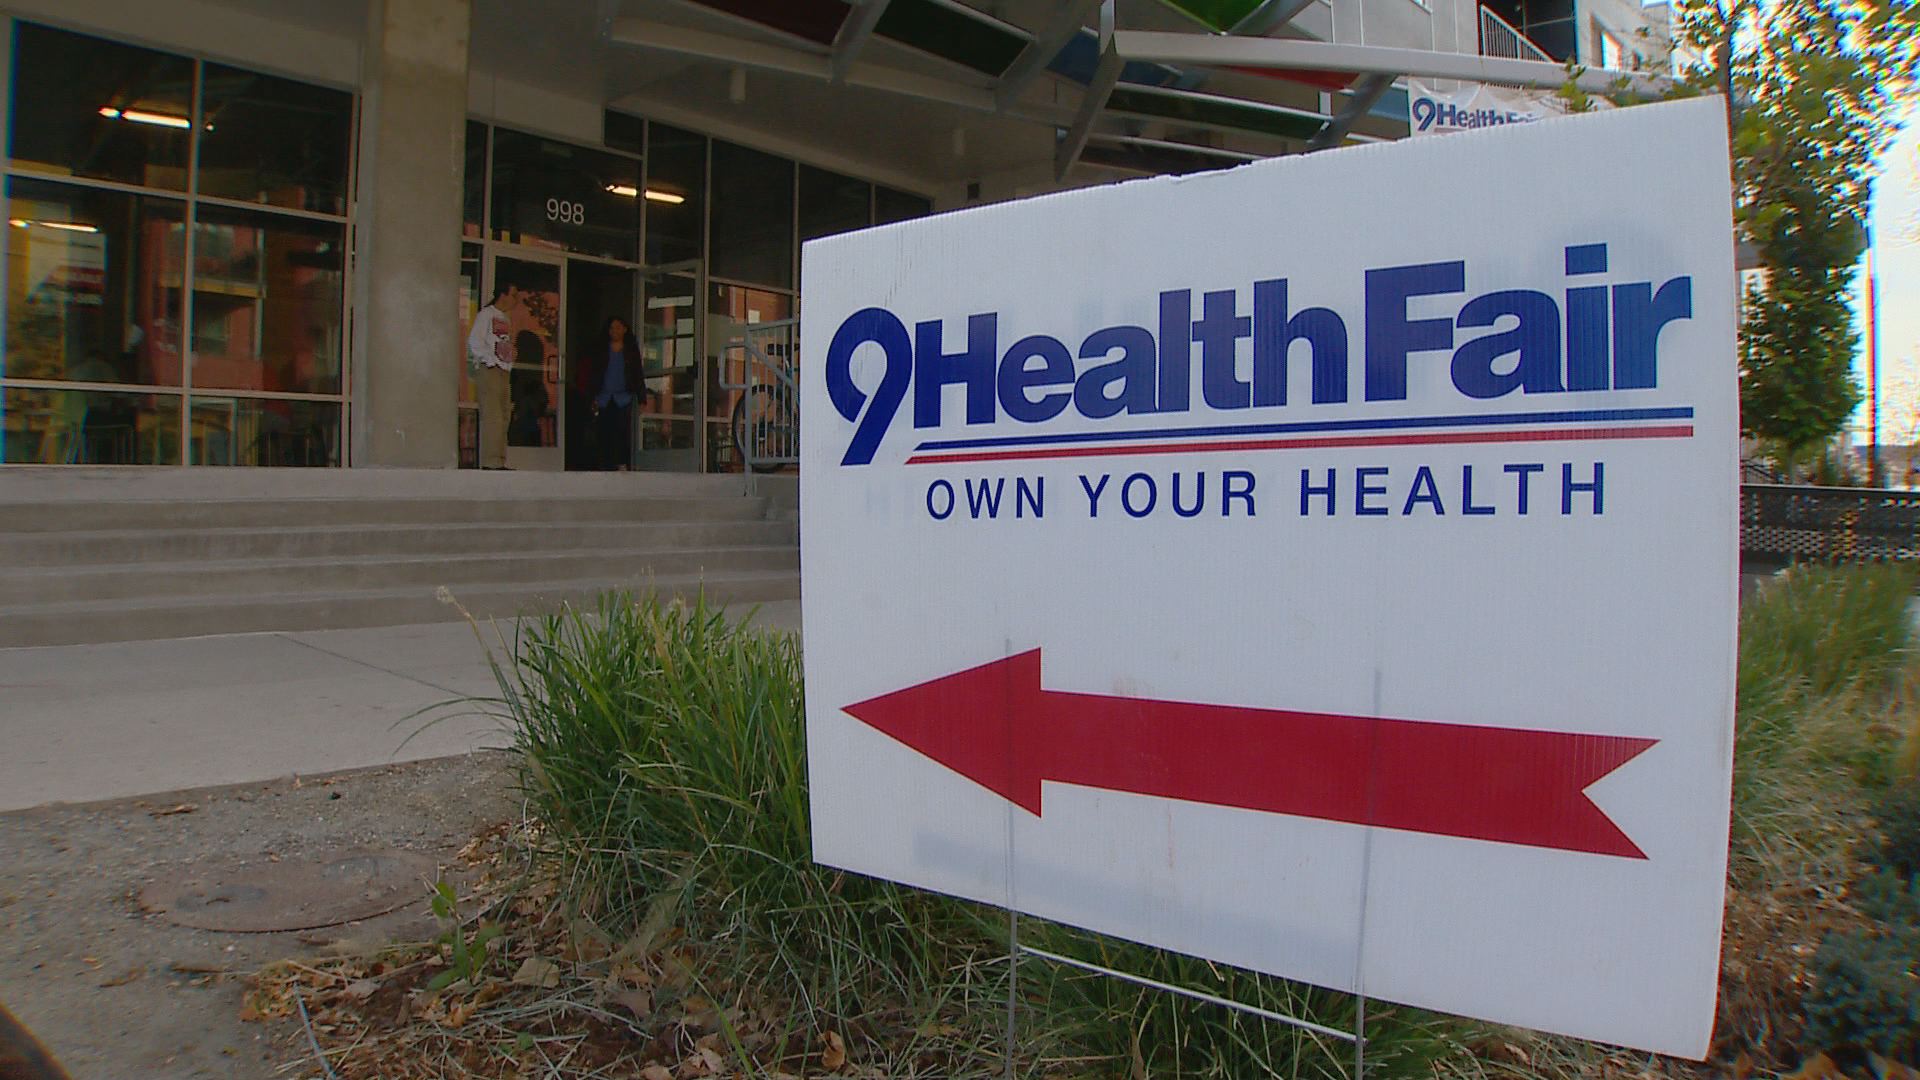 Top 9 Reasons to Attend a 9Health Fair this Spring